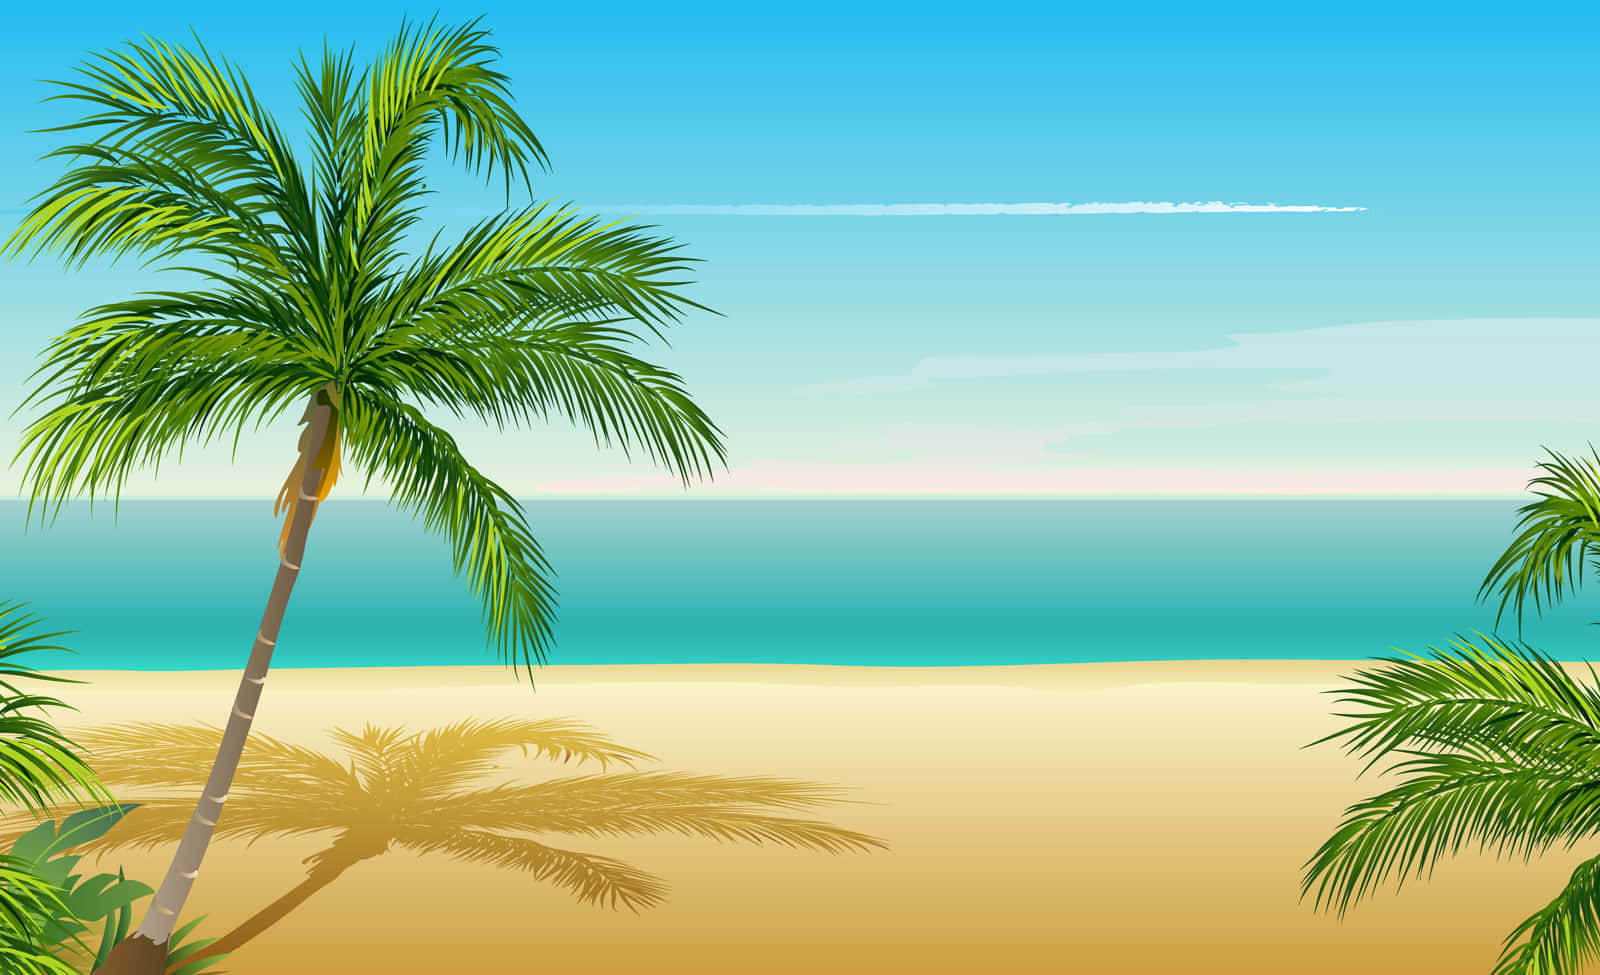 Download Paradise Pictures | Wallpapers.com